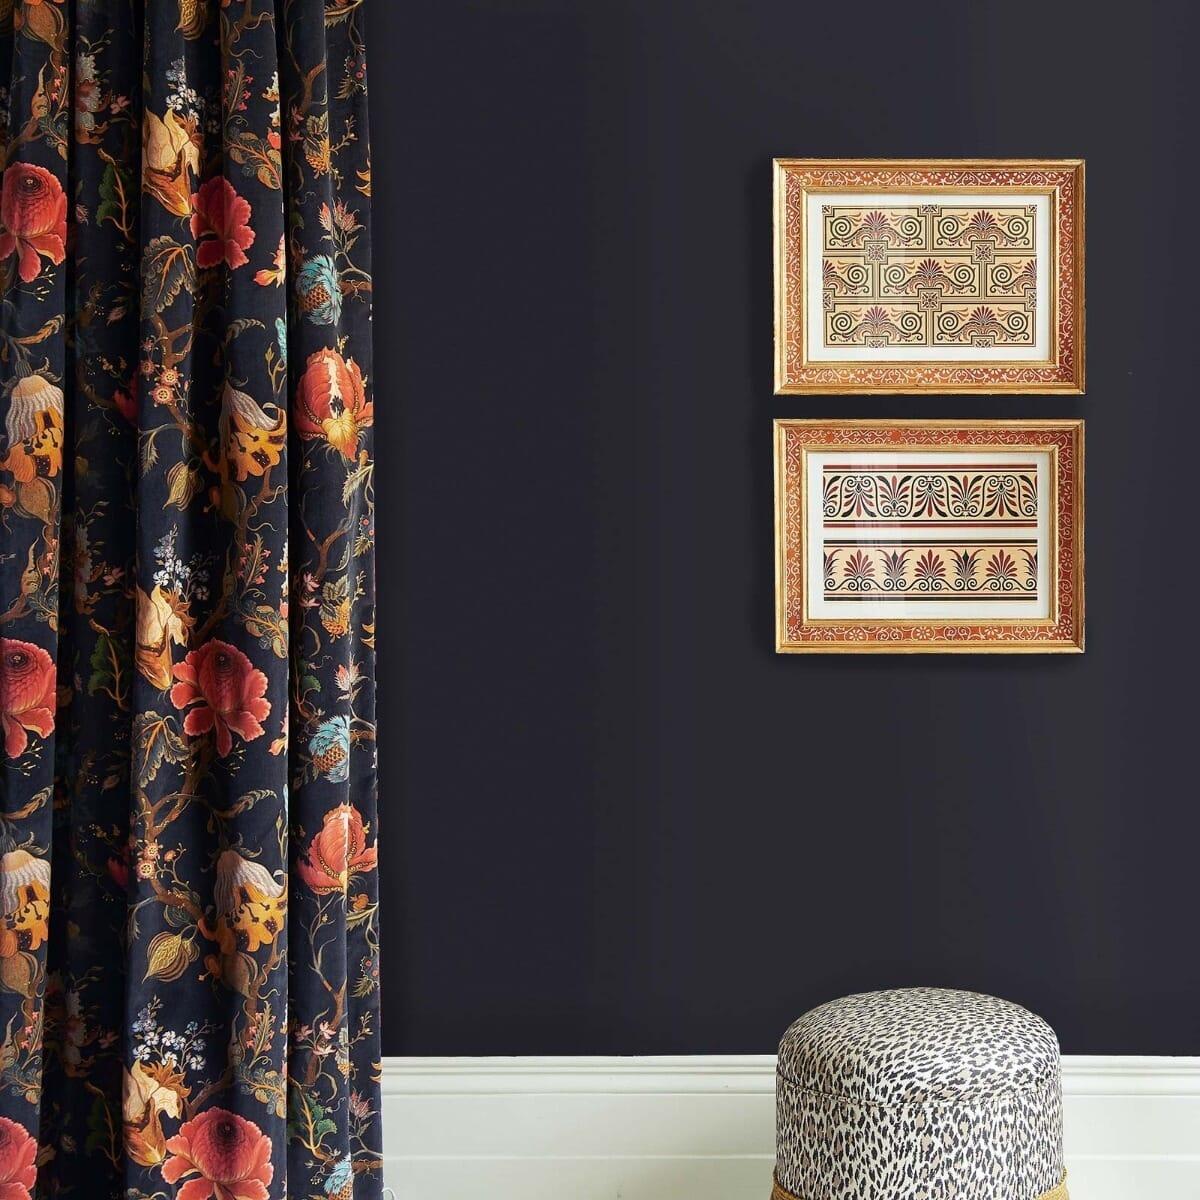 The ARTEMIS print is inspired by Victorian designer, William Morris, and pays homage to Diana Vreeland's iconic 'Garden in Hell' room. Painterly flowers in an array of sumptuous hues pop against a rich black background. Printed on luxury British